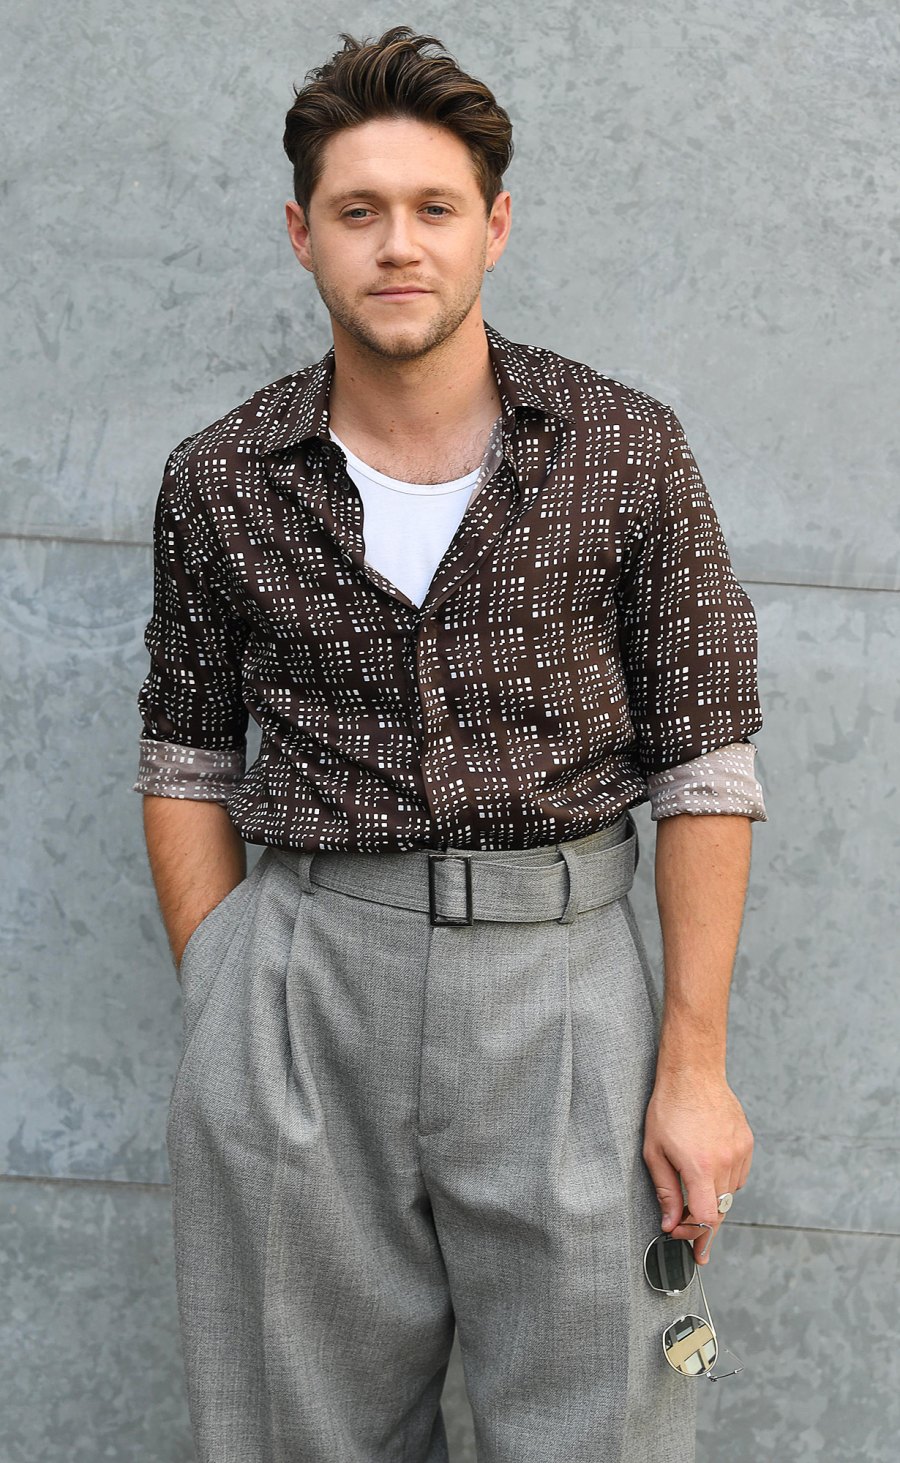 Niall Horan Is Engaged to Amelia Woolley After 2 Years of Dating- Details 370 Emporio Armani - Runway - Milano Moda Donna S/S 2022, Milan, Italy - 23 Sep 2021